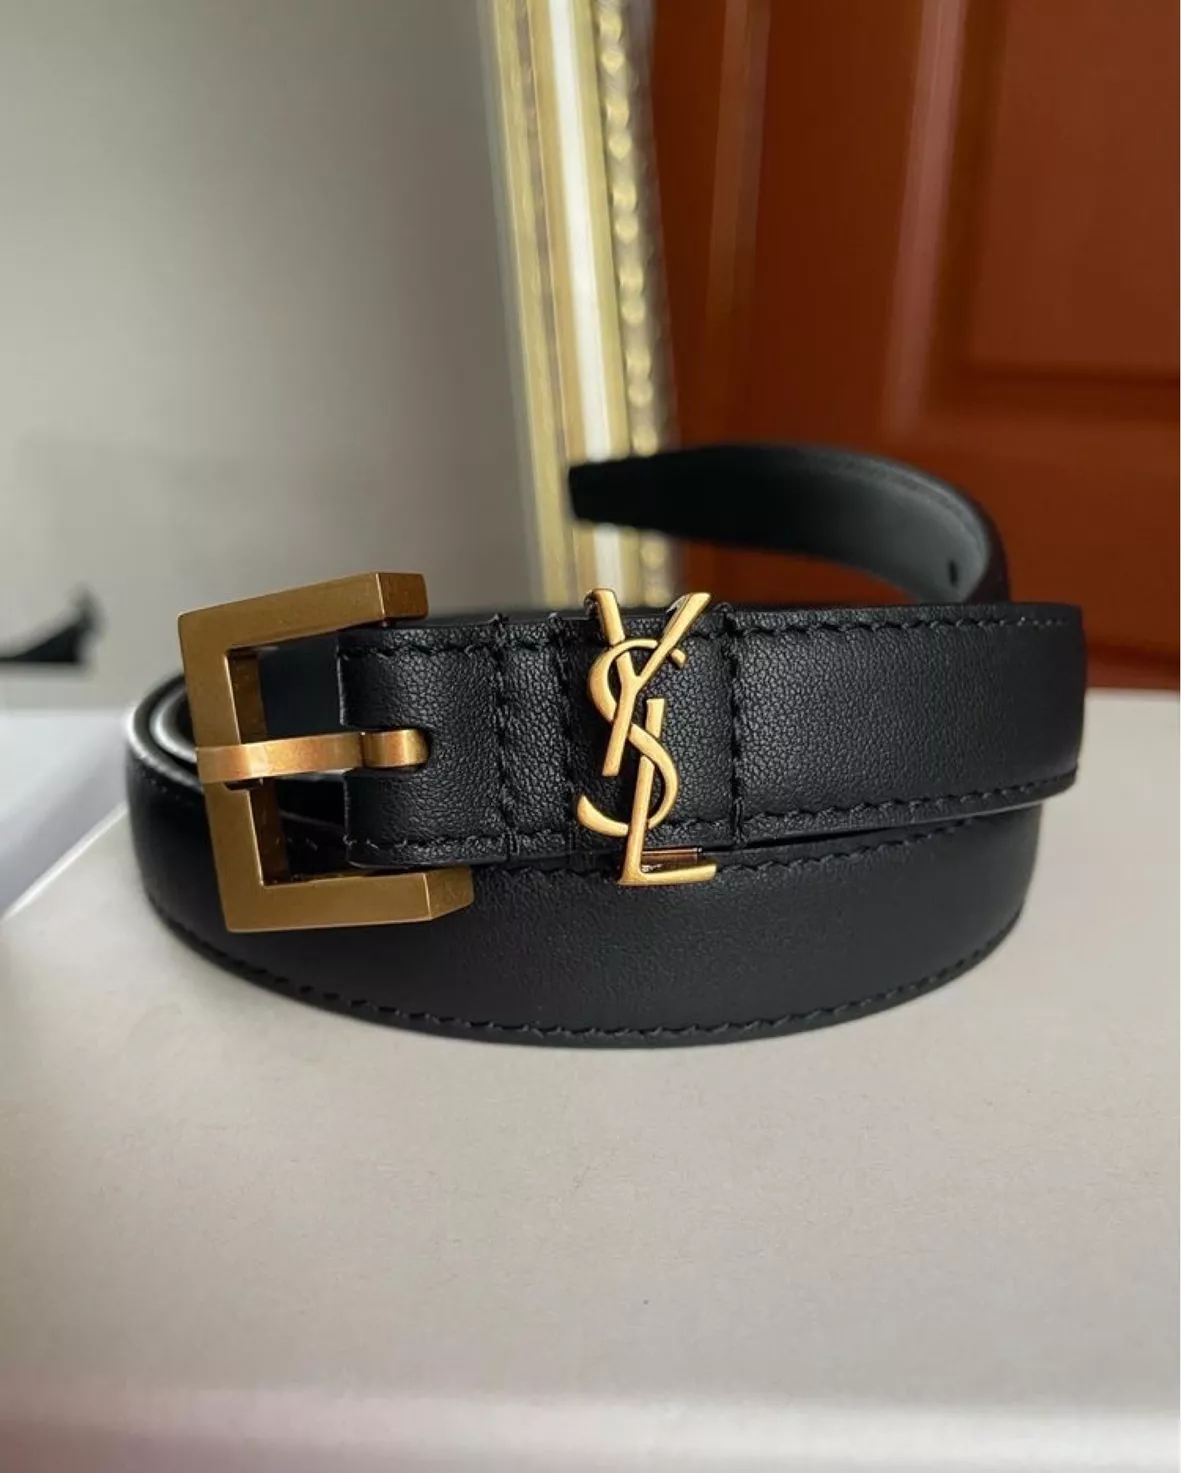 DHGATE DESIGNER REPLICA  Gucci unboxing + review 